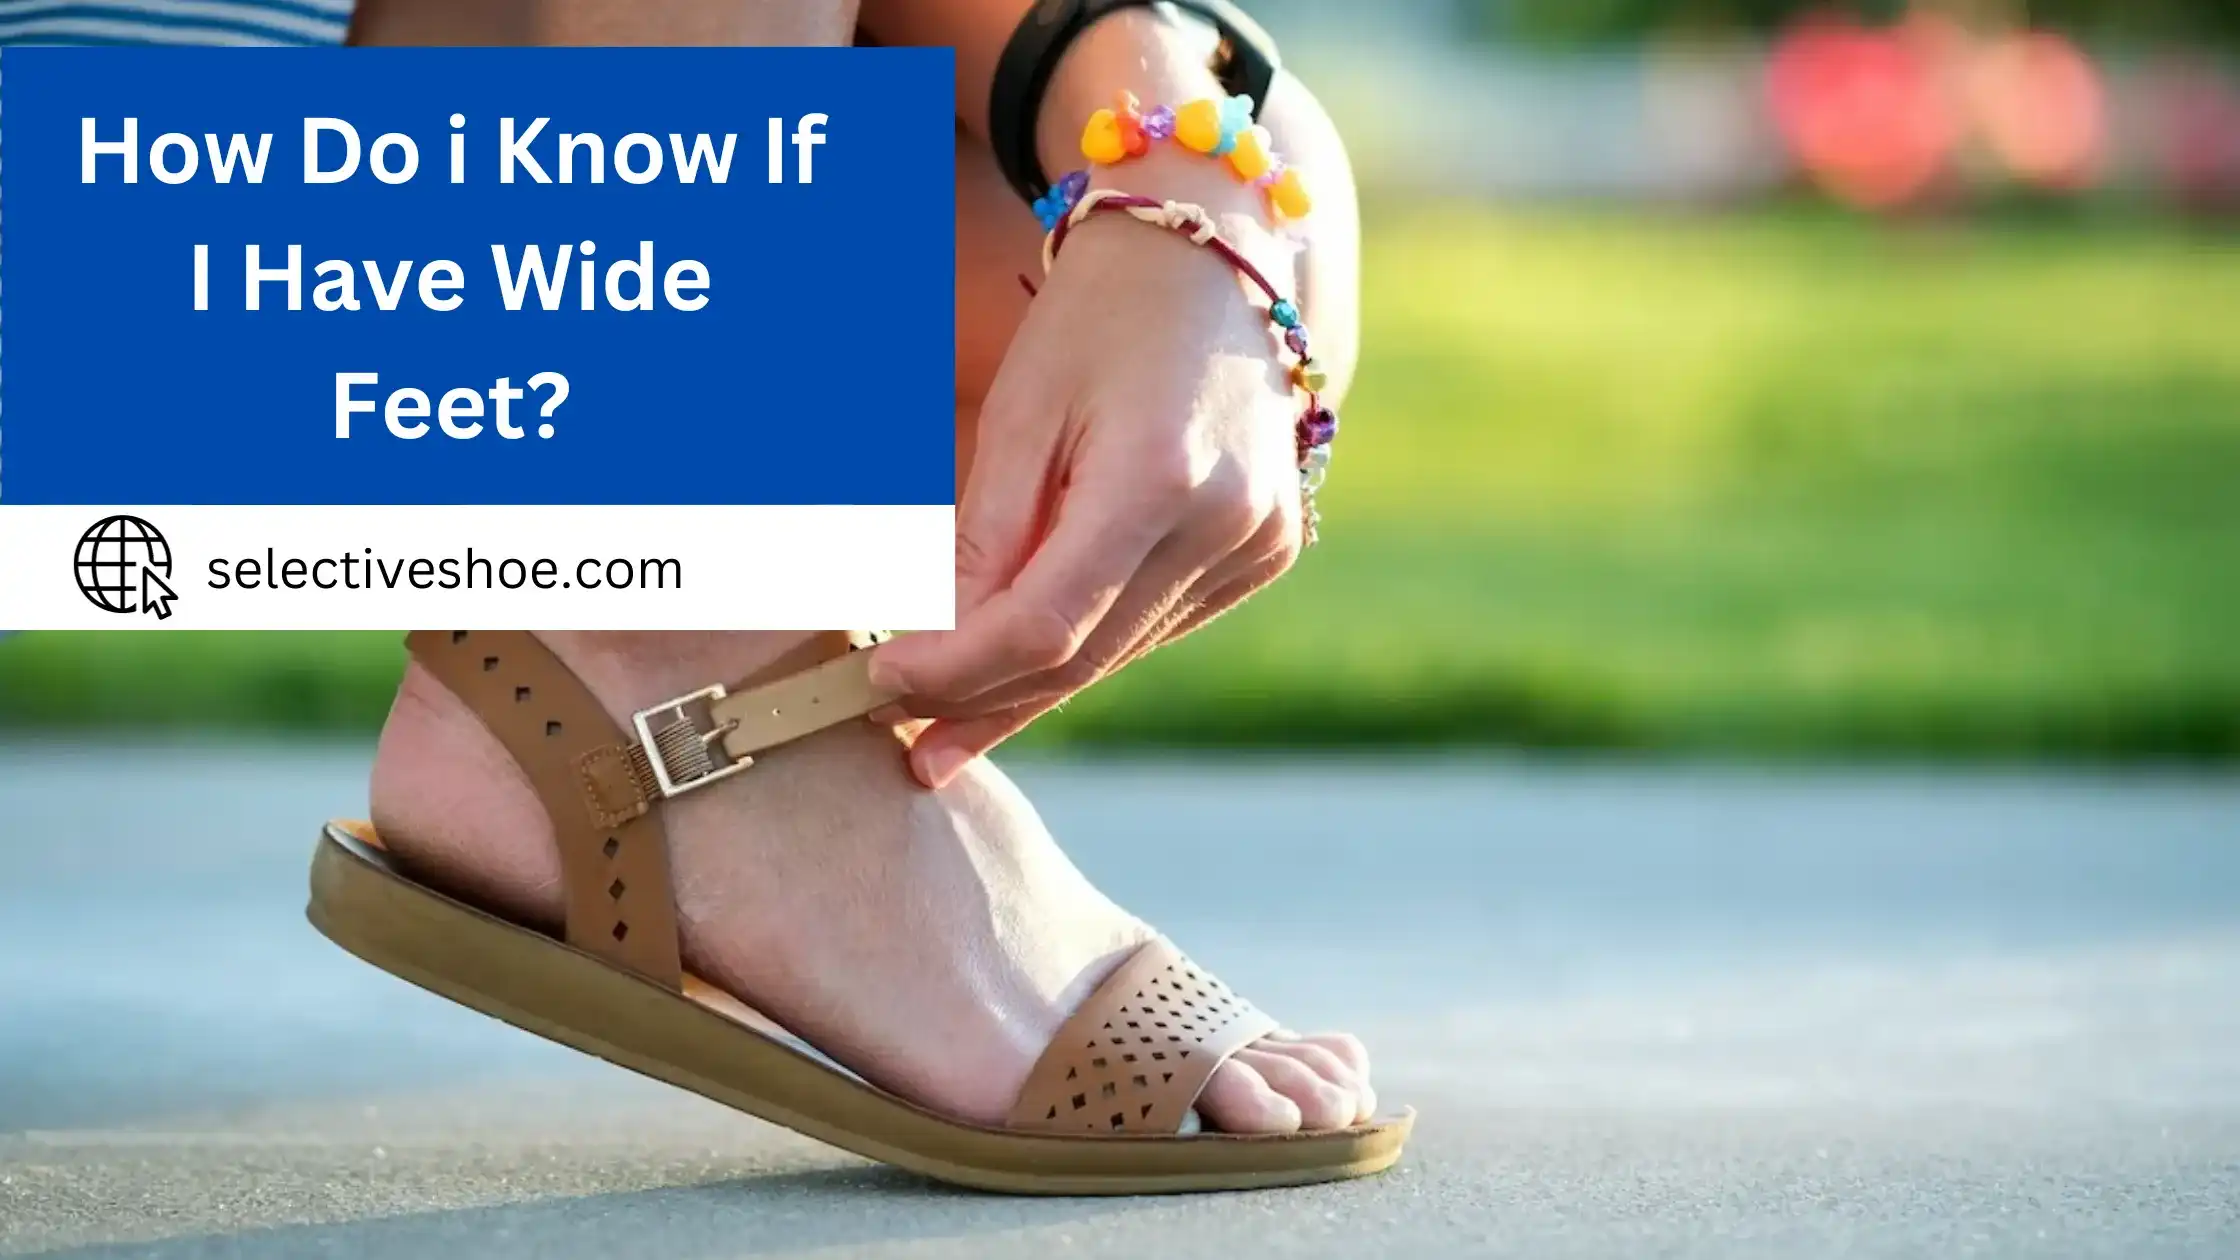 How do i Know if i Have Wide Feet? You Should Need to Know